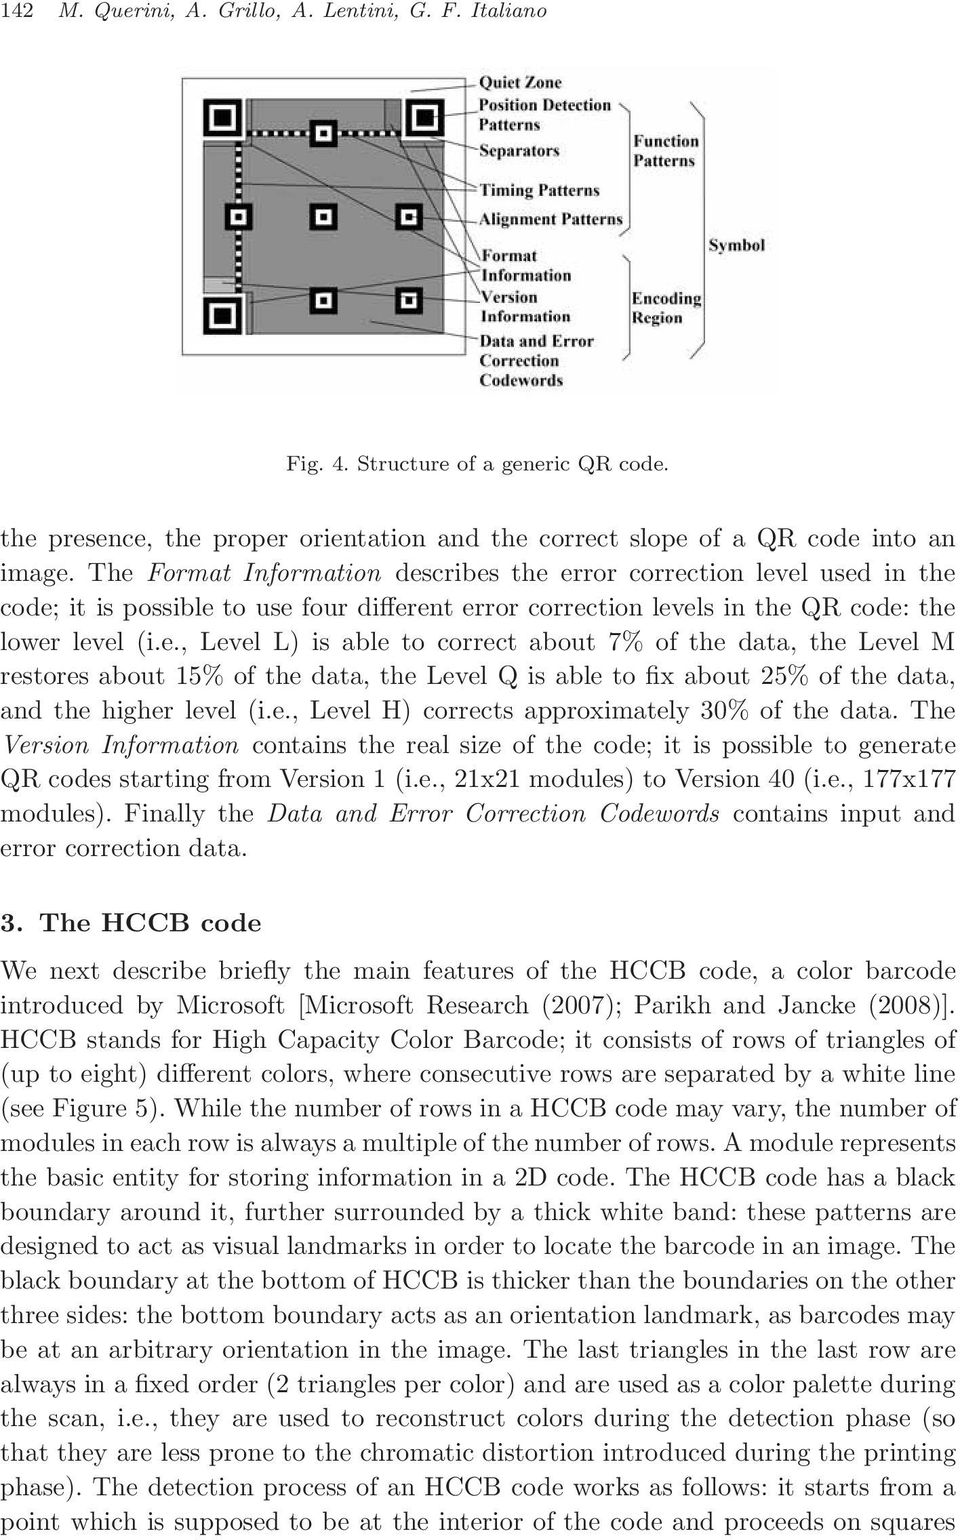 e., Level H) corrects approximately 30% of the data. The Version Information contains the real size of the code; it is possible to generate QR codes starting from Version 1 (i.e., 21x21 modules) to Version 40 (i.